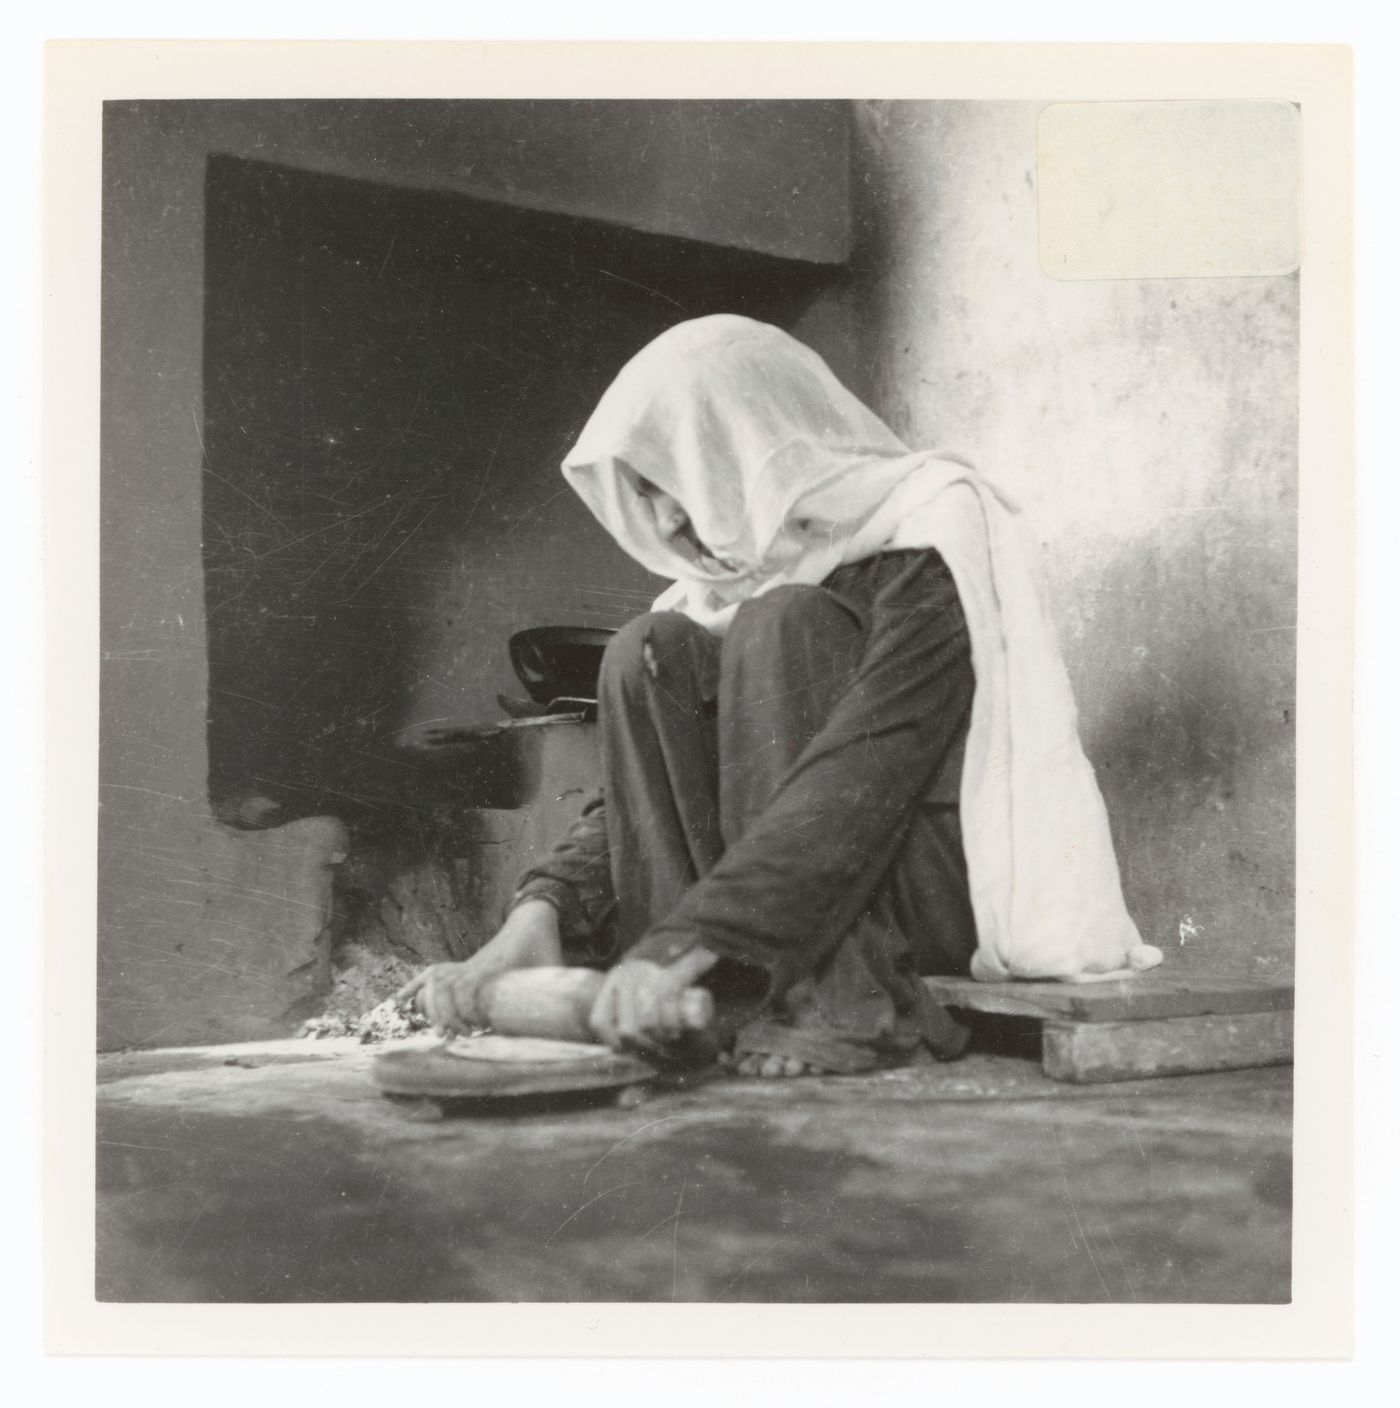 View of an unidentified woman cooking, possibly in Chandigarh, India